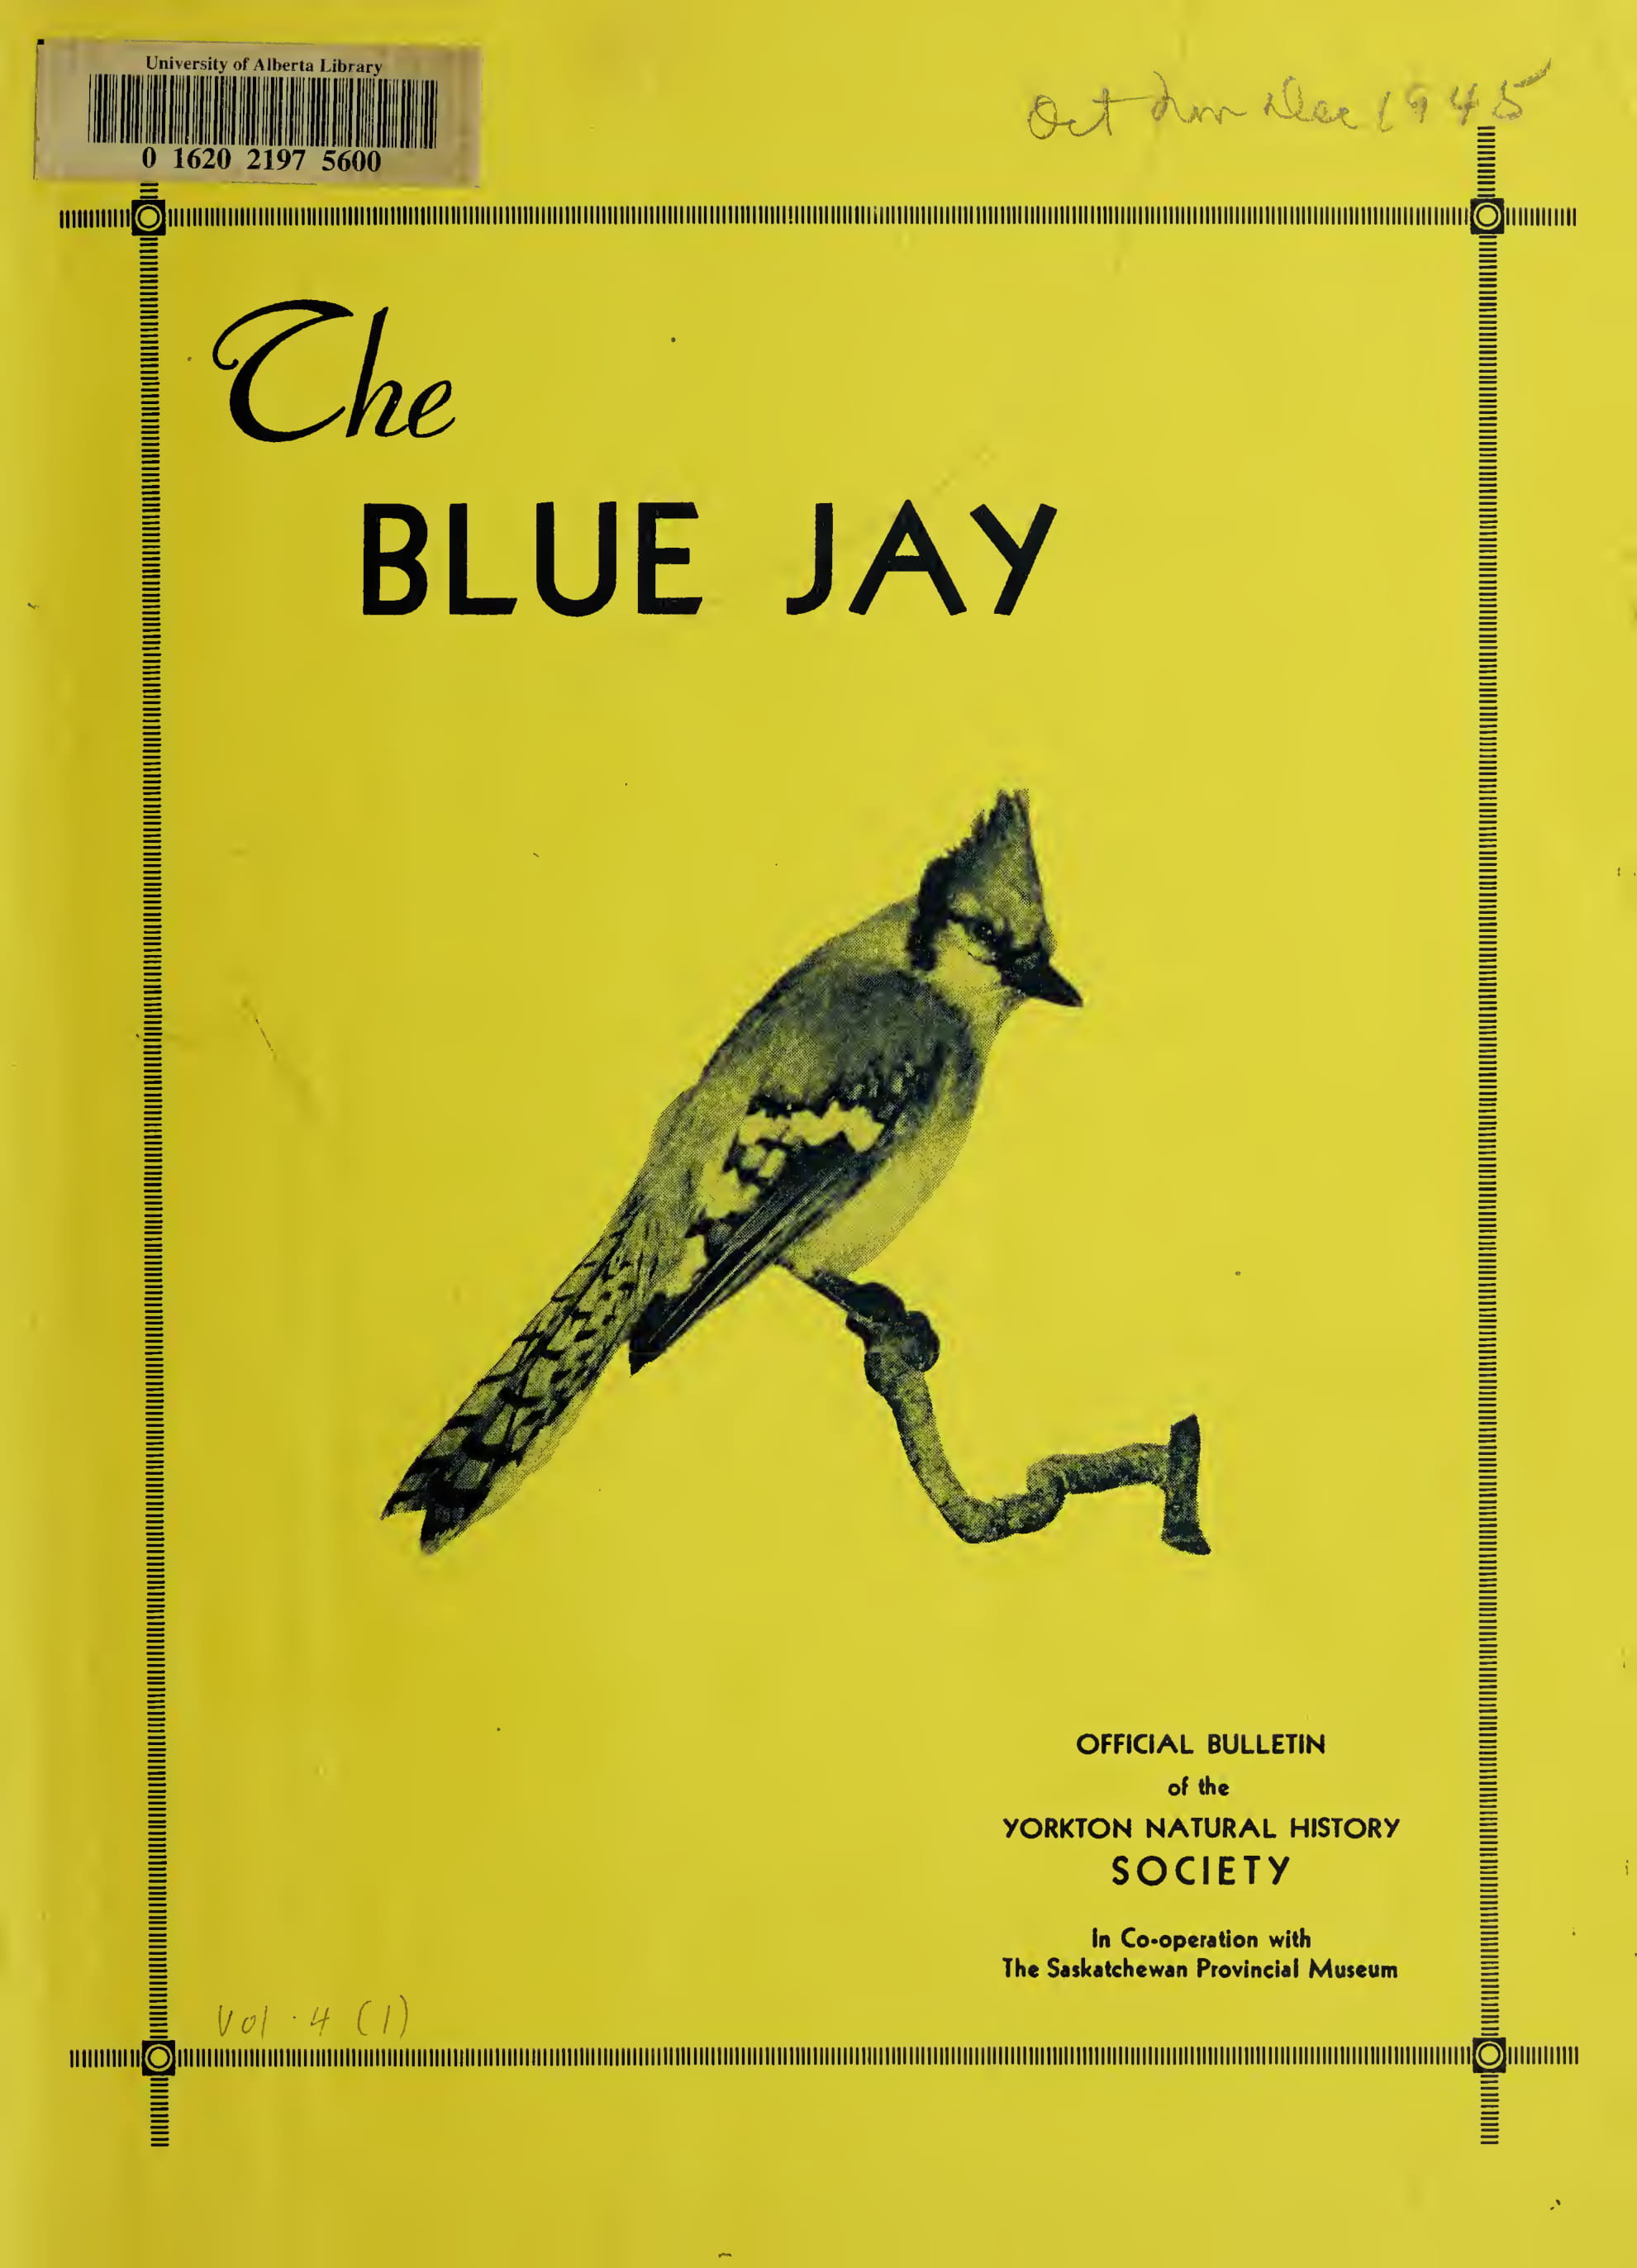 Cover Image for Fall 1945